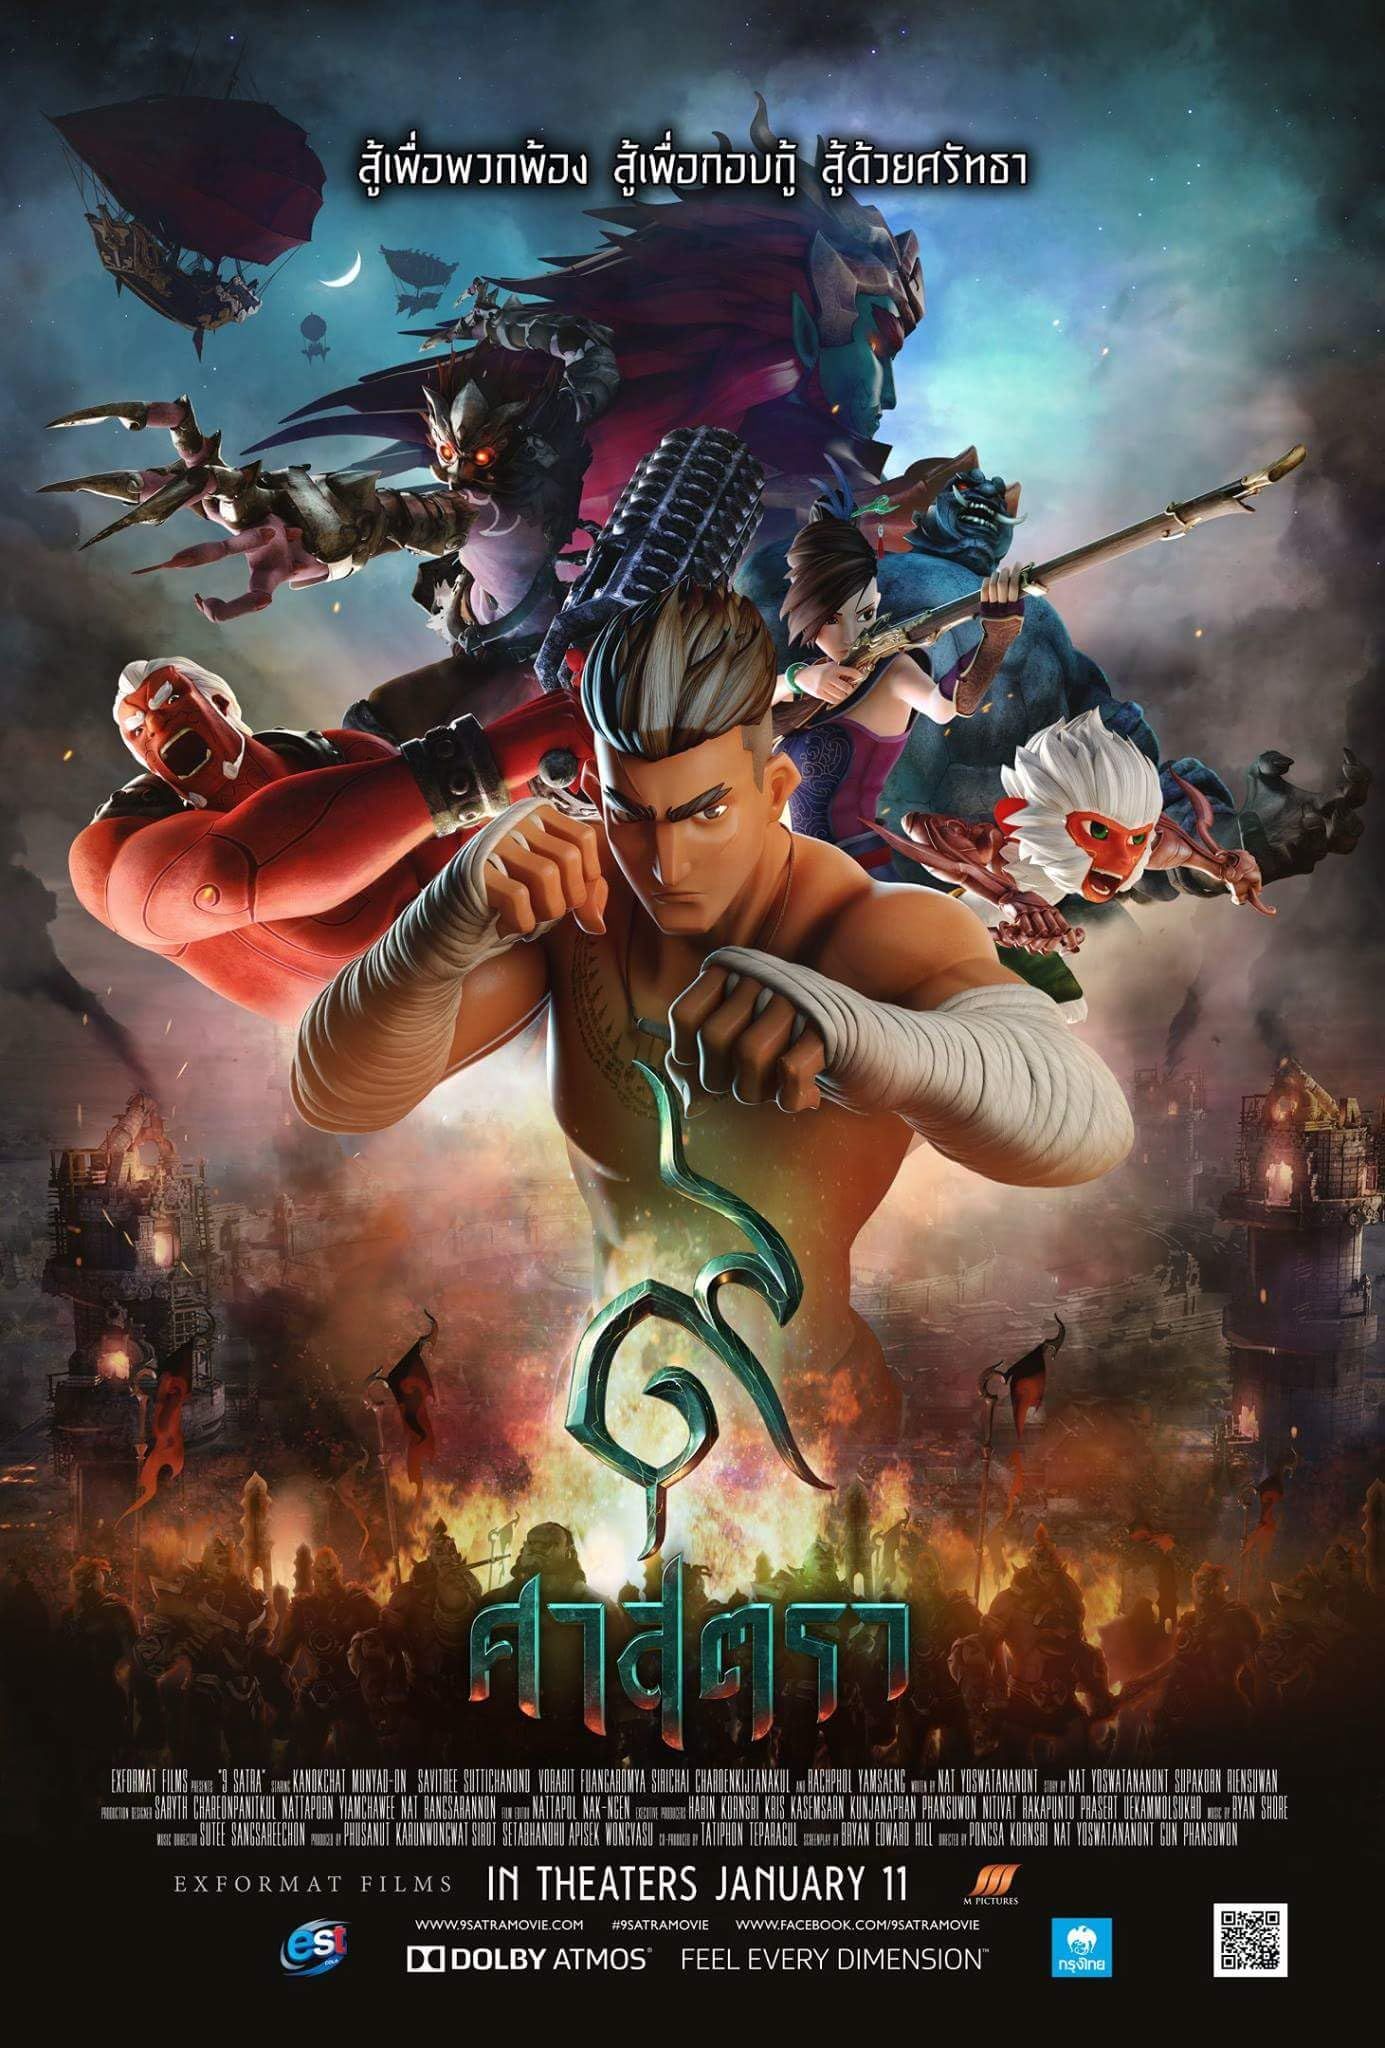 The Legend of Muay Thai 9 Satra (2018) Hindi Dubbed Movie download full movie